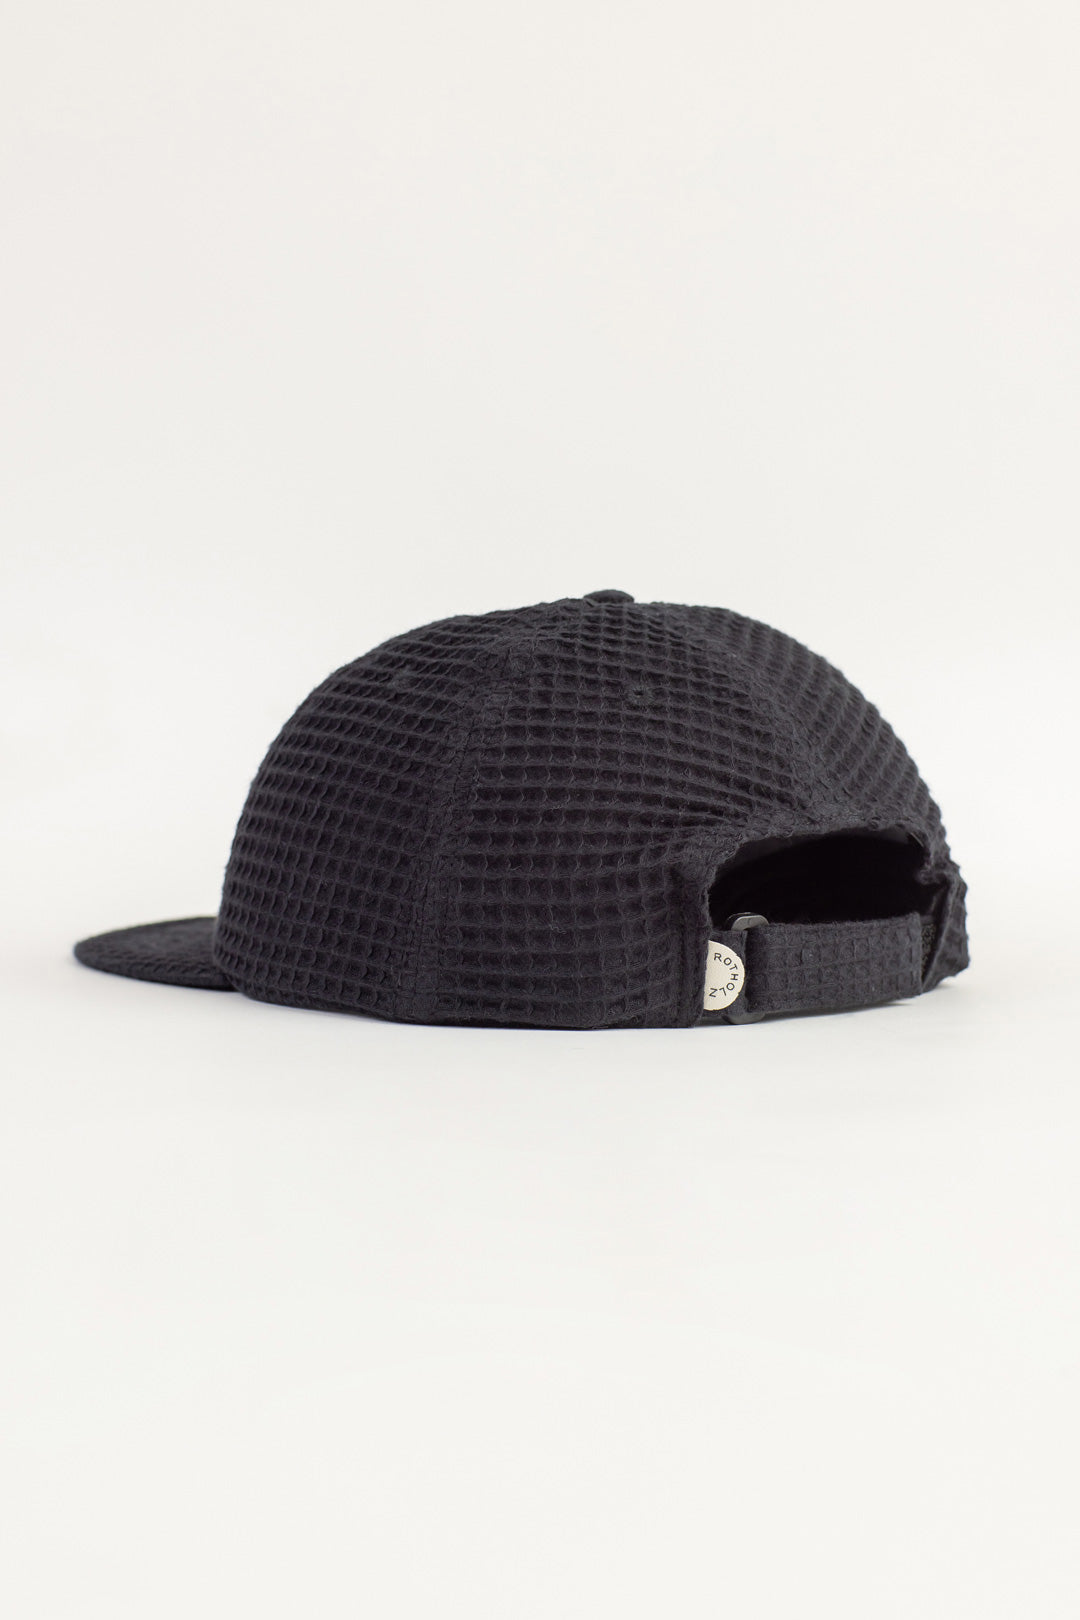 Black waffle cap made from 100% organic cotton by Rotholz